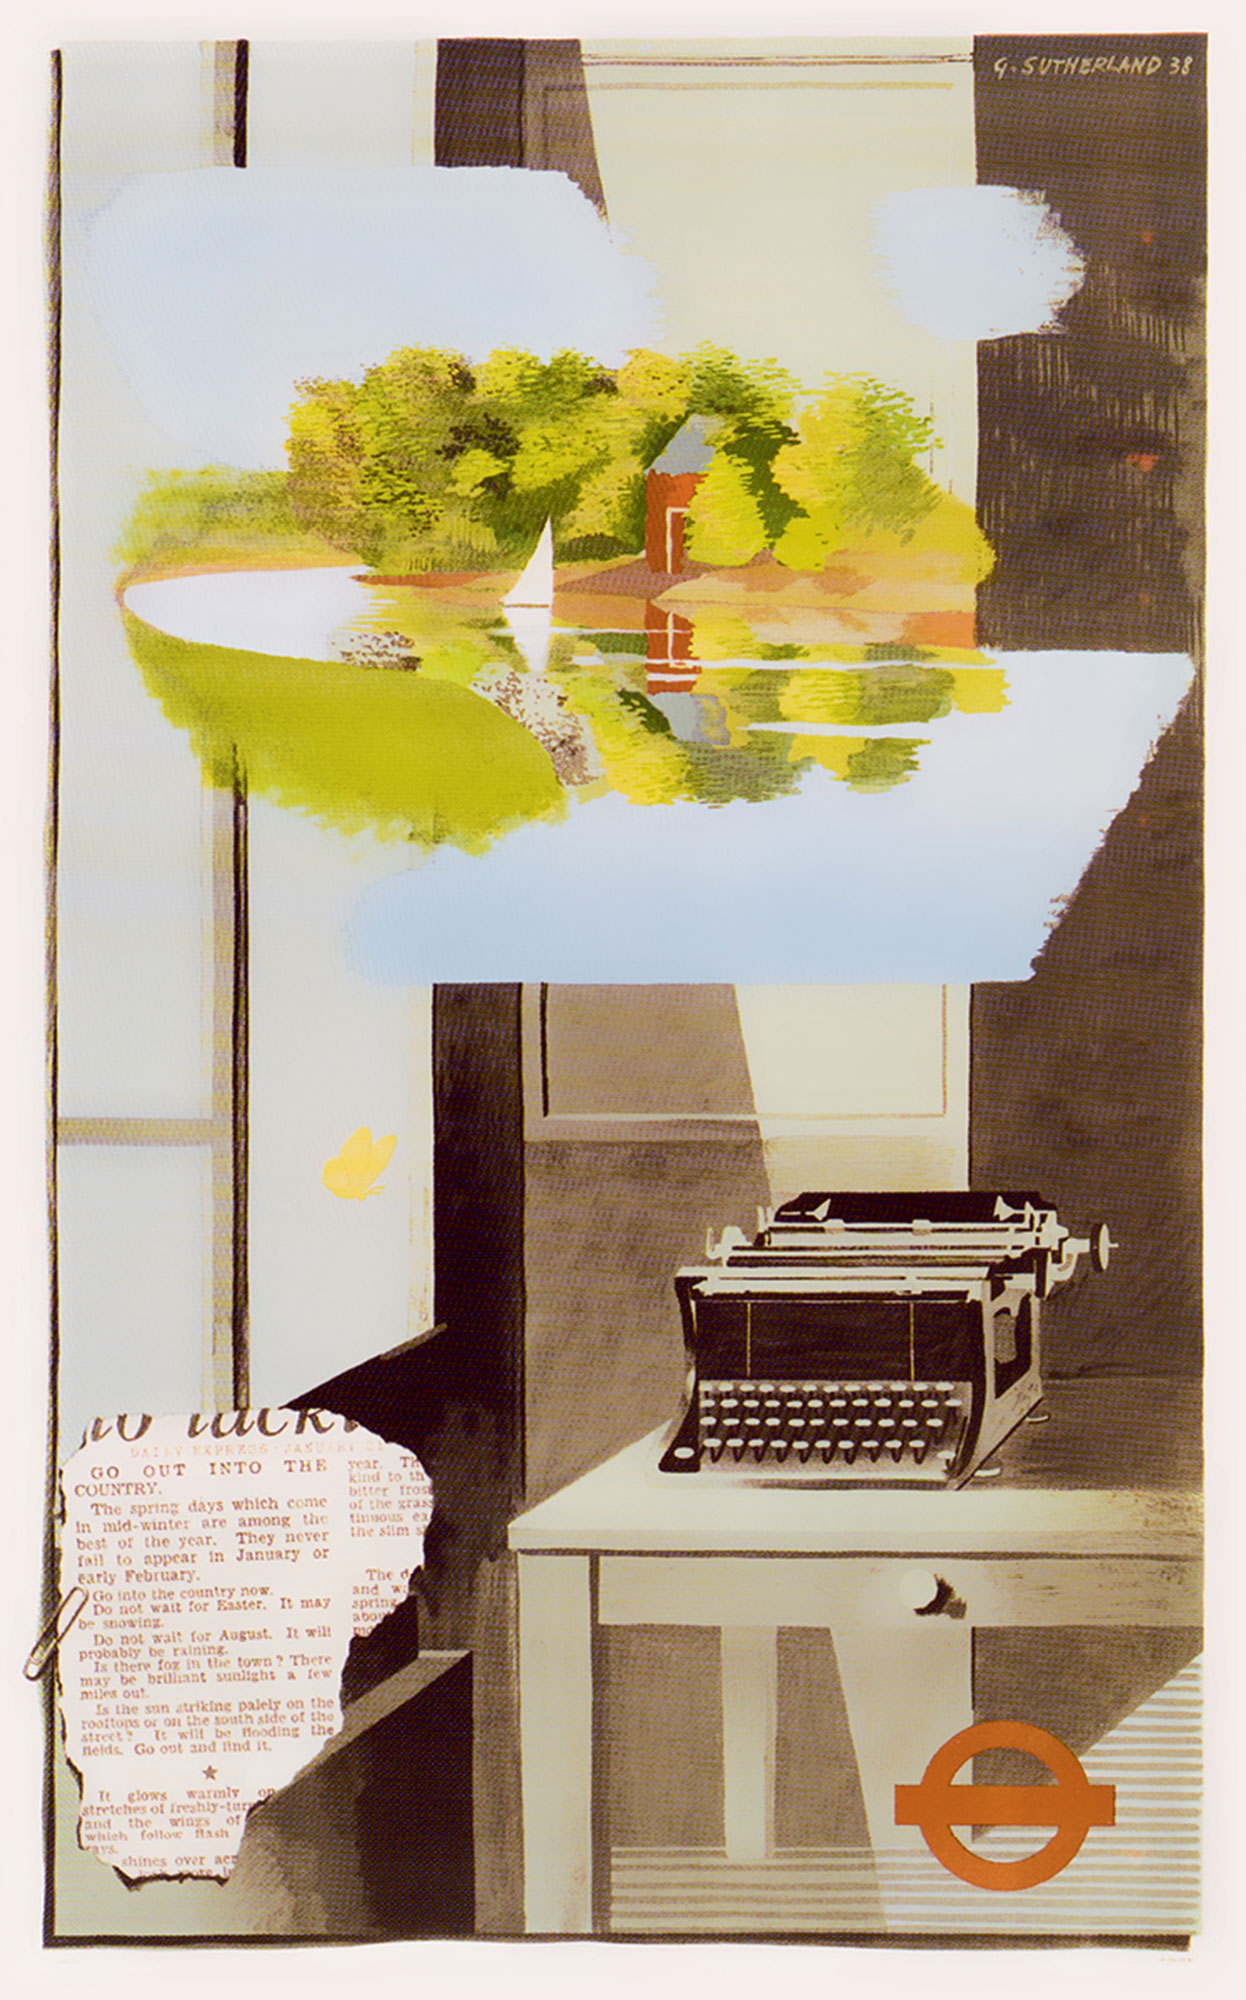 Graham Sutherand’s nineteen thirty-eight London Transport poster titled “Go Out Into the Country” depicting a dreamscape of the countryside floating above a typewriter in an office.